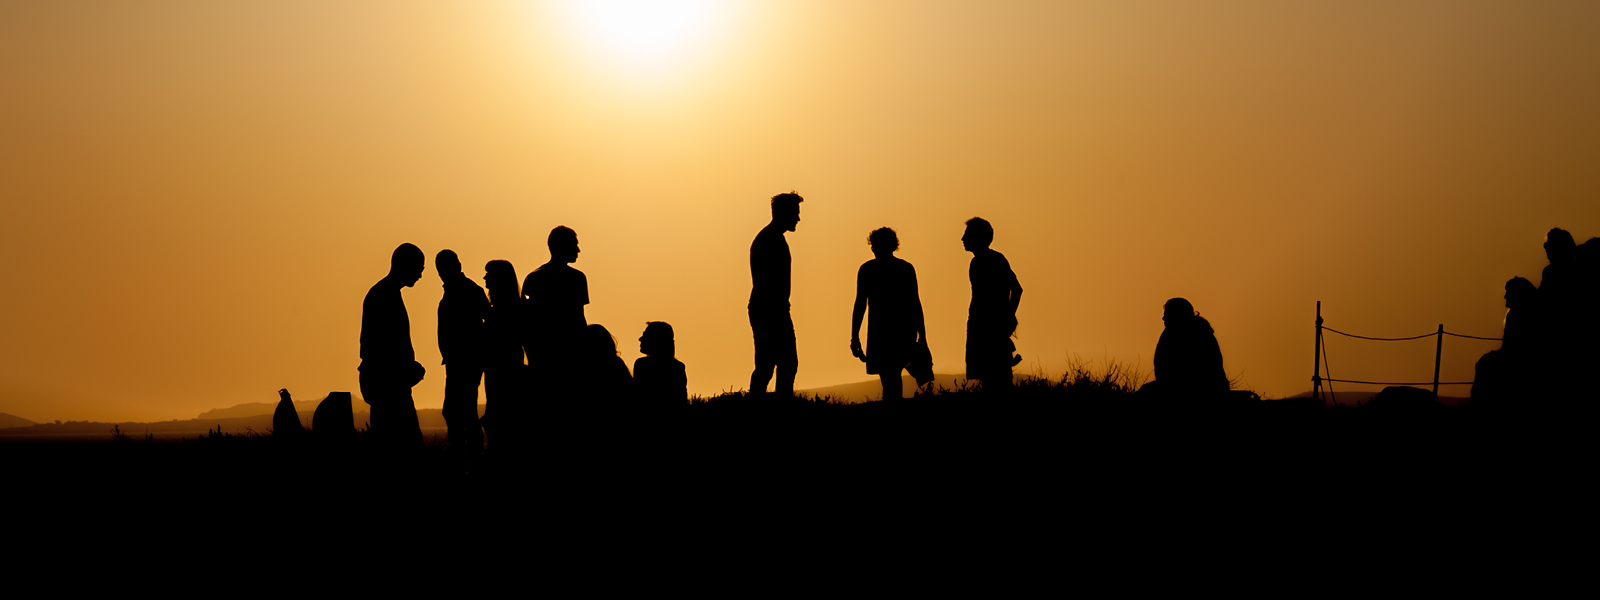 Silhouette of a group of people with a sunset in the background